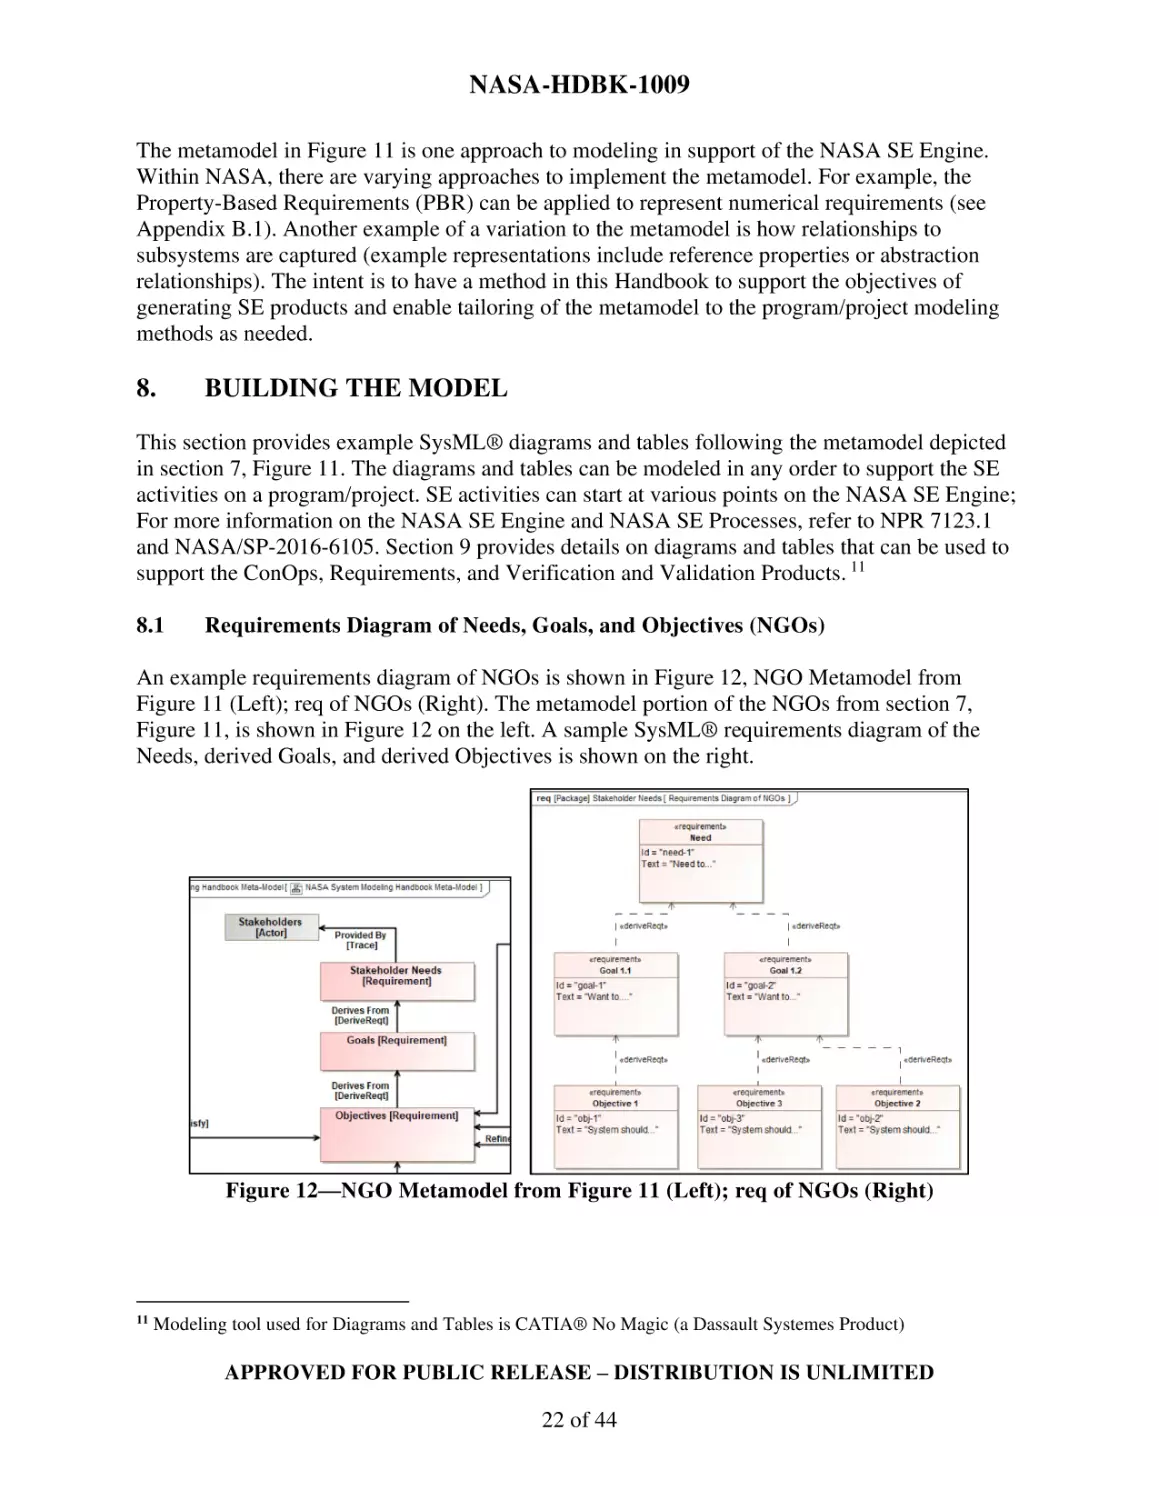 8. BUILDING THE MODEL
8.1 Requirements Diagram of Needs, Goals, and Objectives (NGOs)